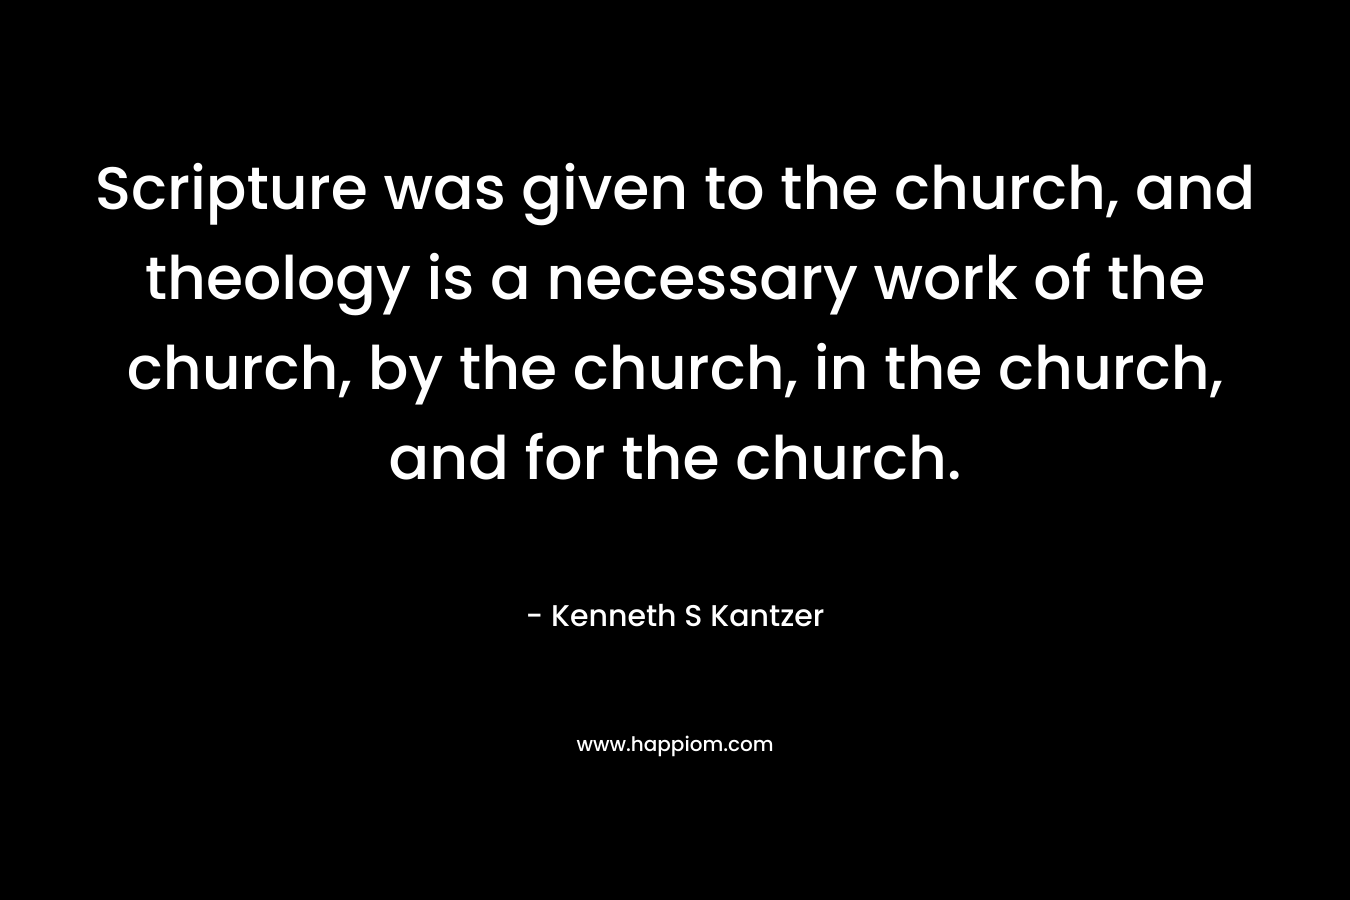 Scripture was given to the church, and theology is a necessary work of the church, by the church, in the church, and for the church. – Kenneth S Kantzer